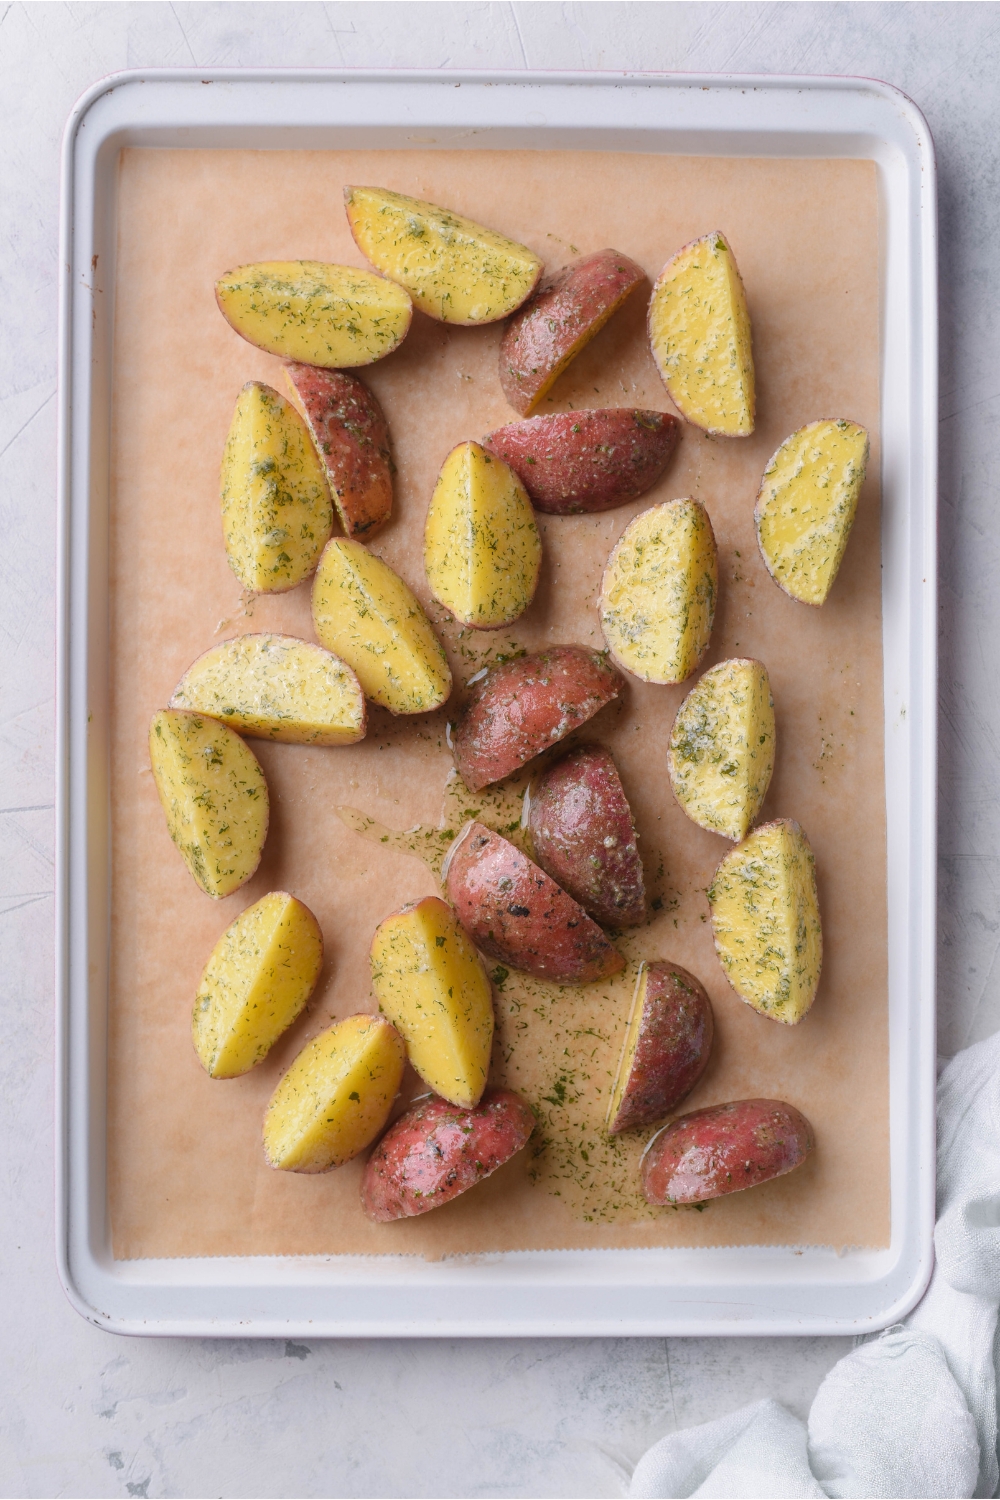 Quartered and seasoned potatoes seasoned with oil and ranch seasoning spread out evenly on a baking sheet lined with parchment paper.